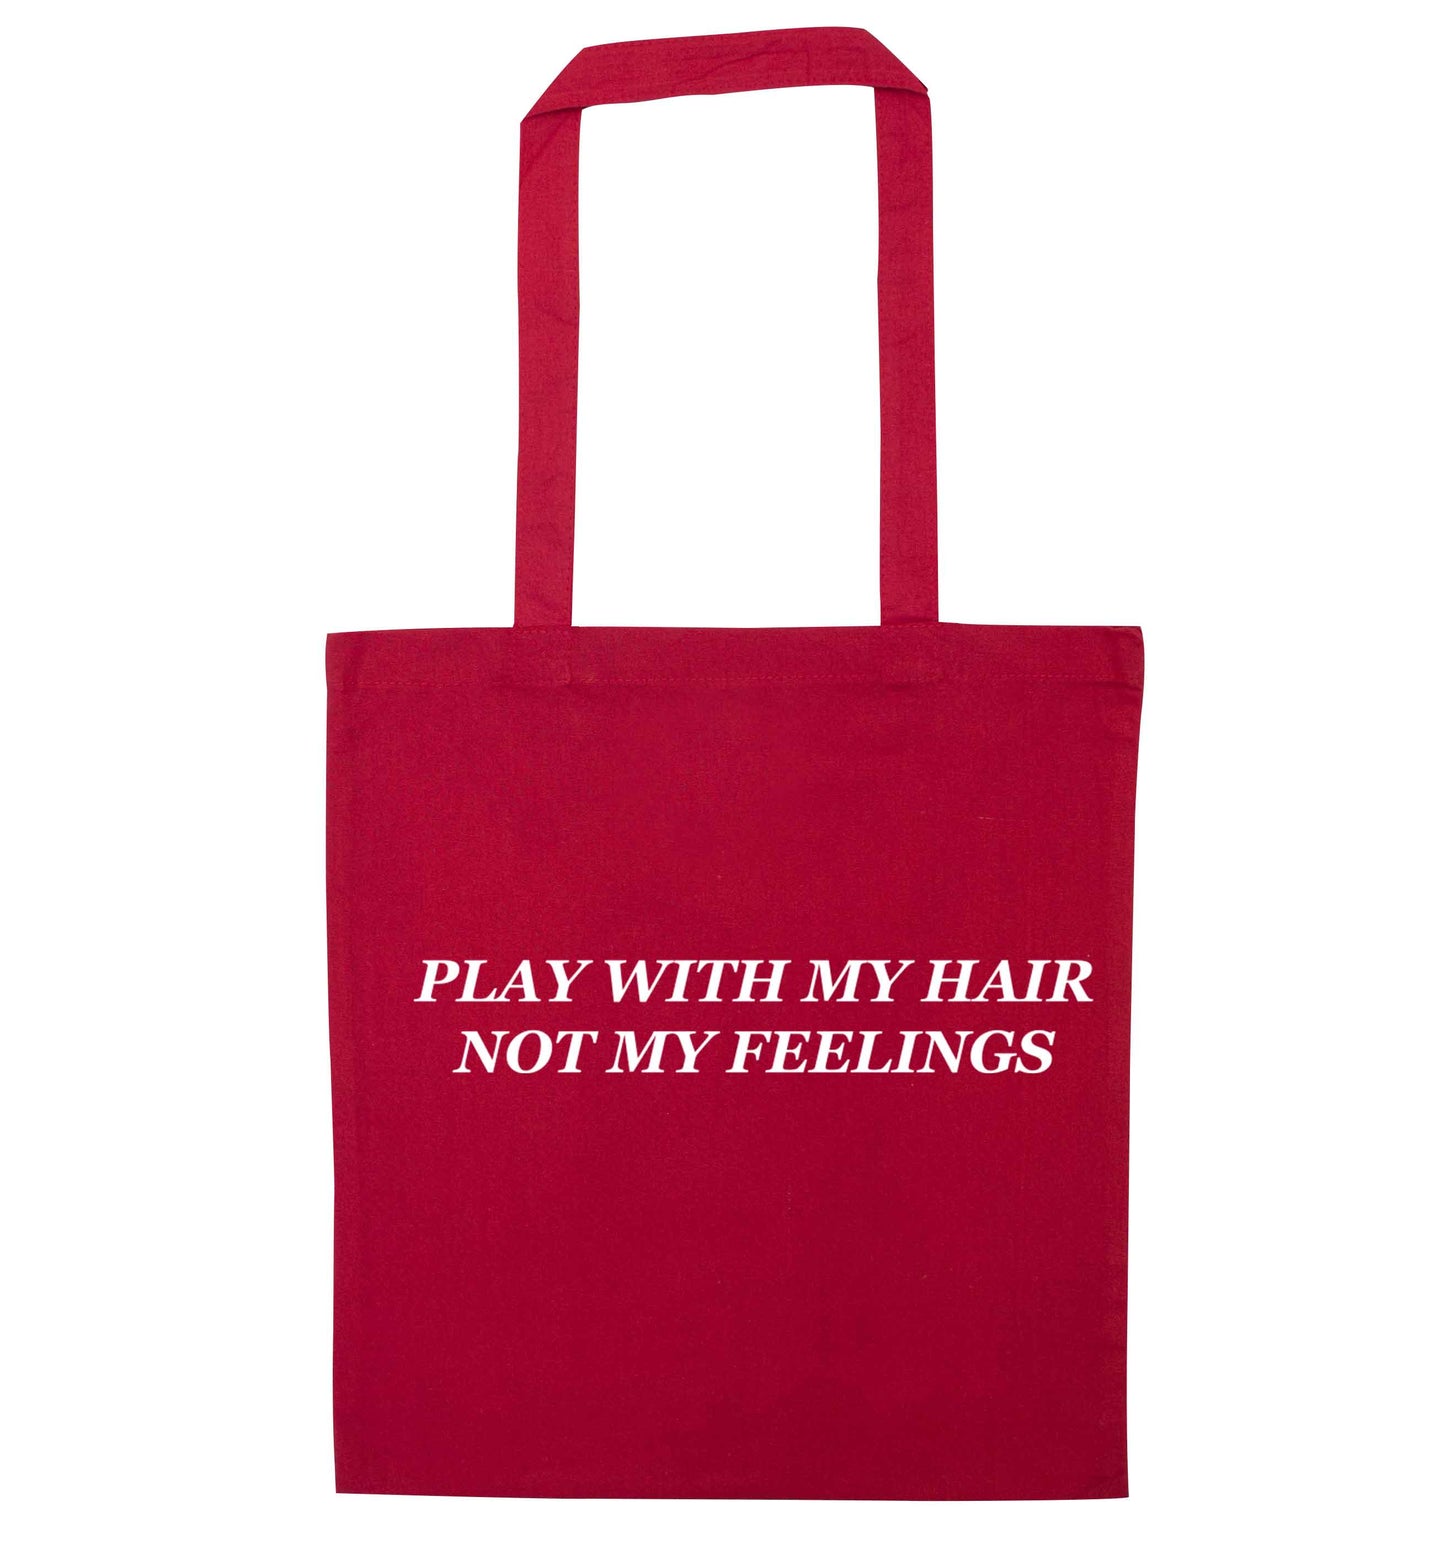 Play with my hair not my feelings red tote bag